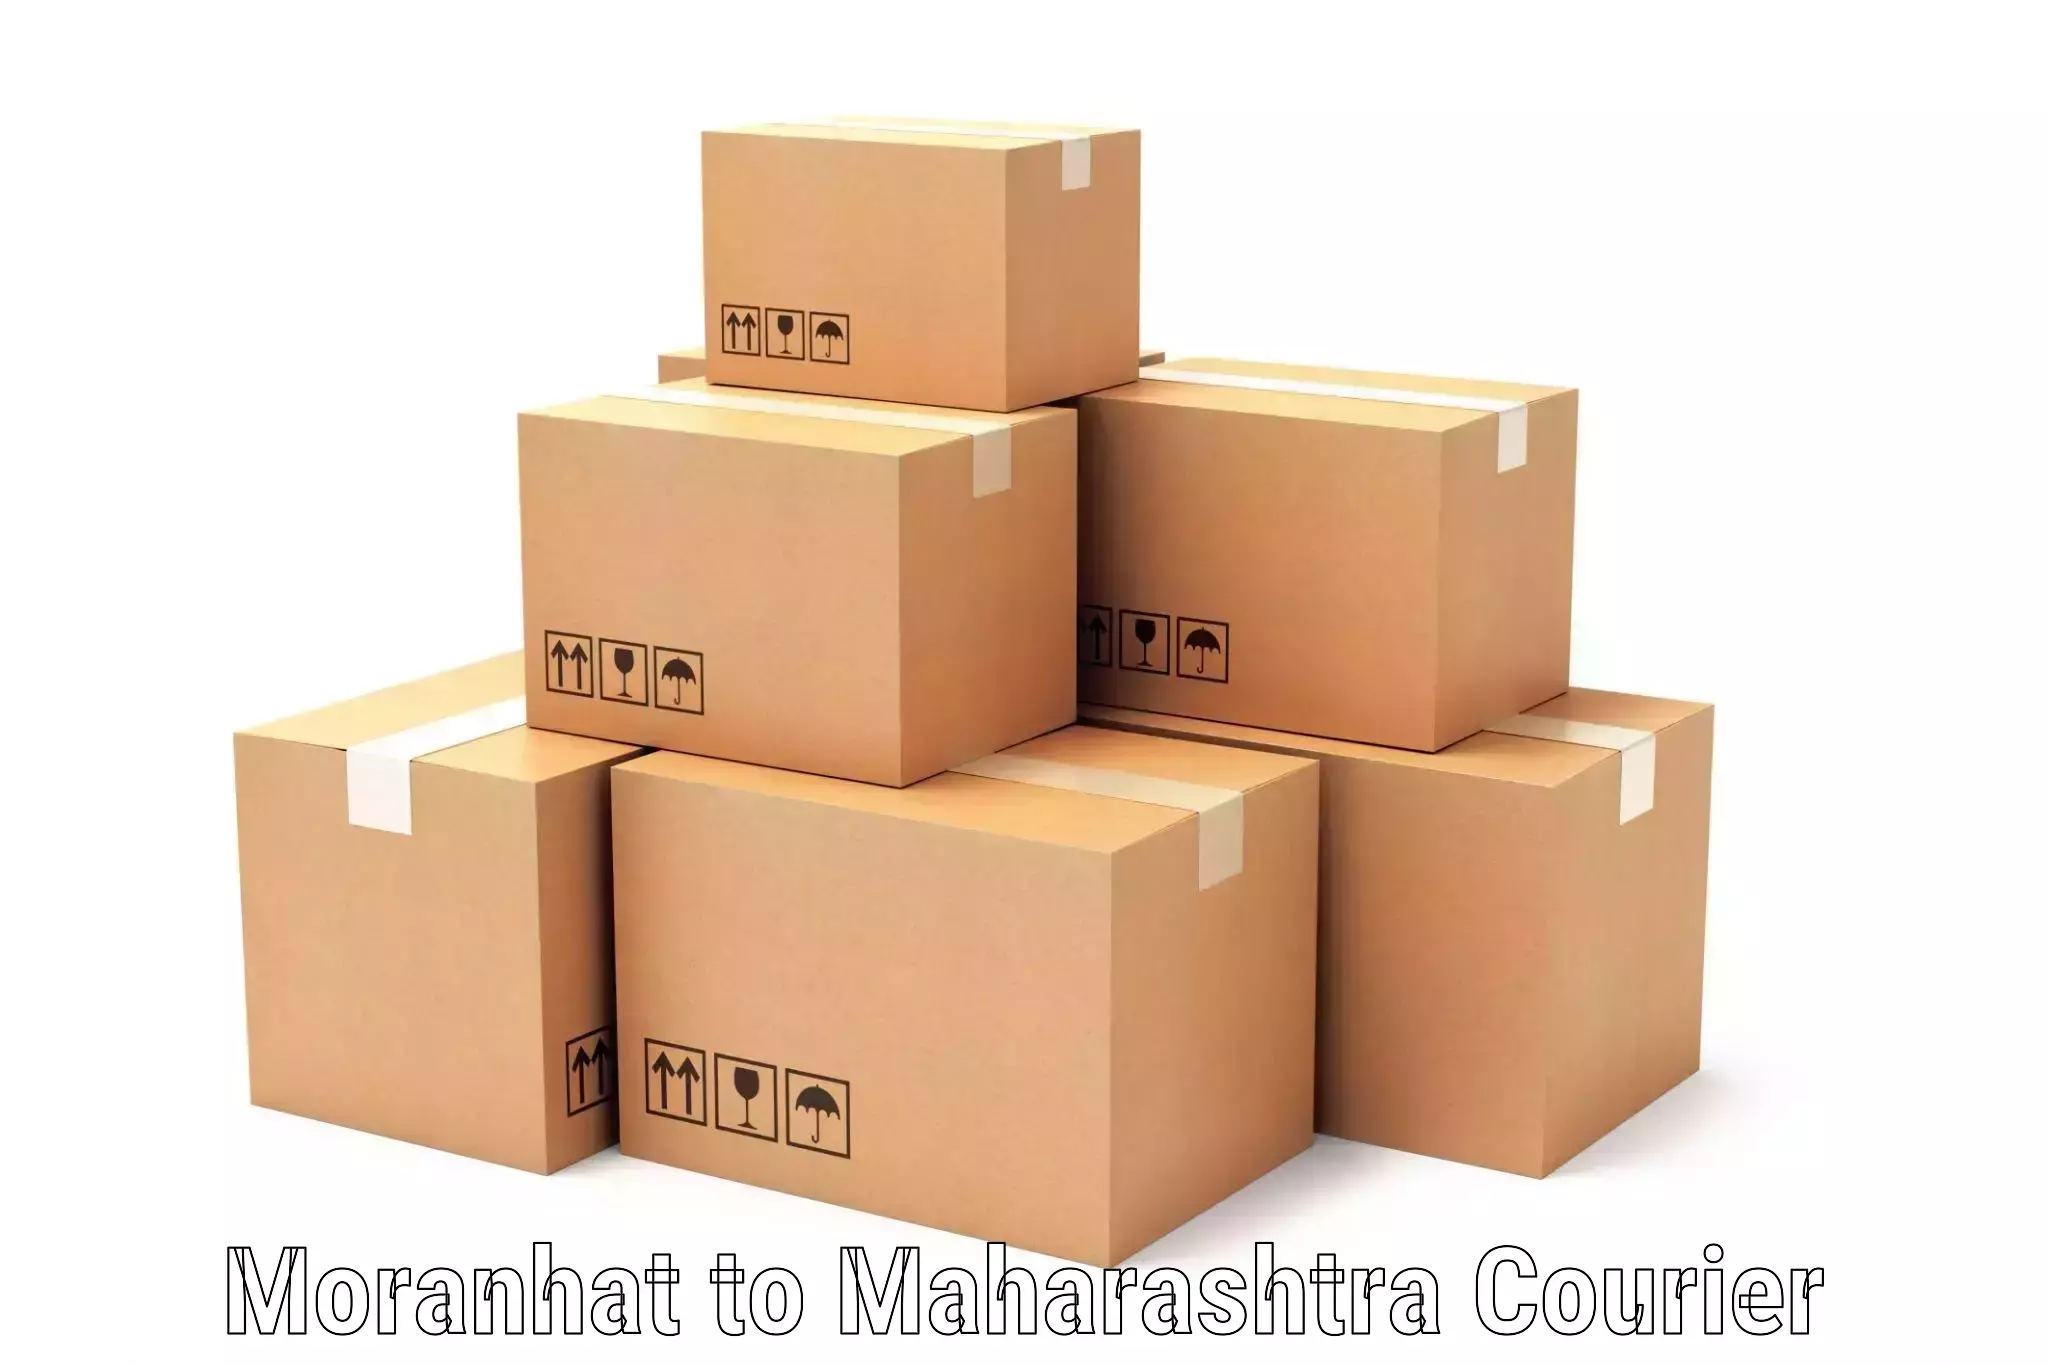 Trackable shipping service Moranhat to Solapur